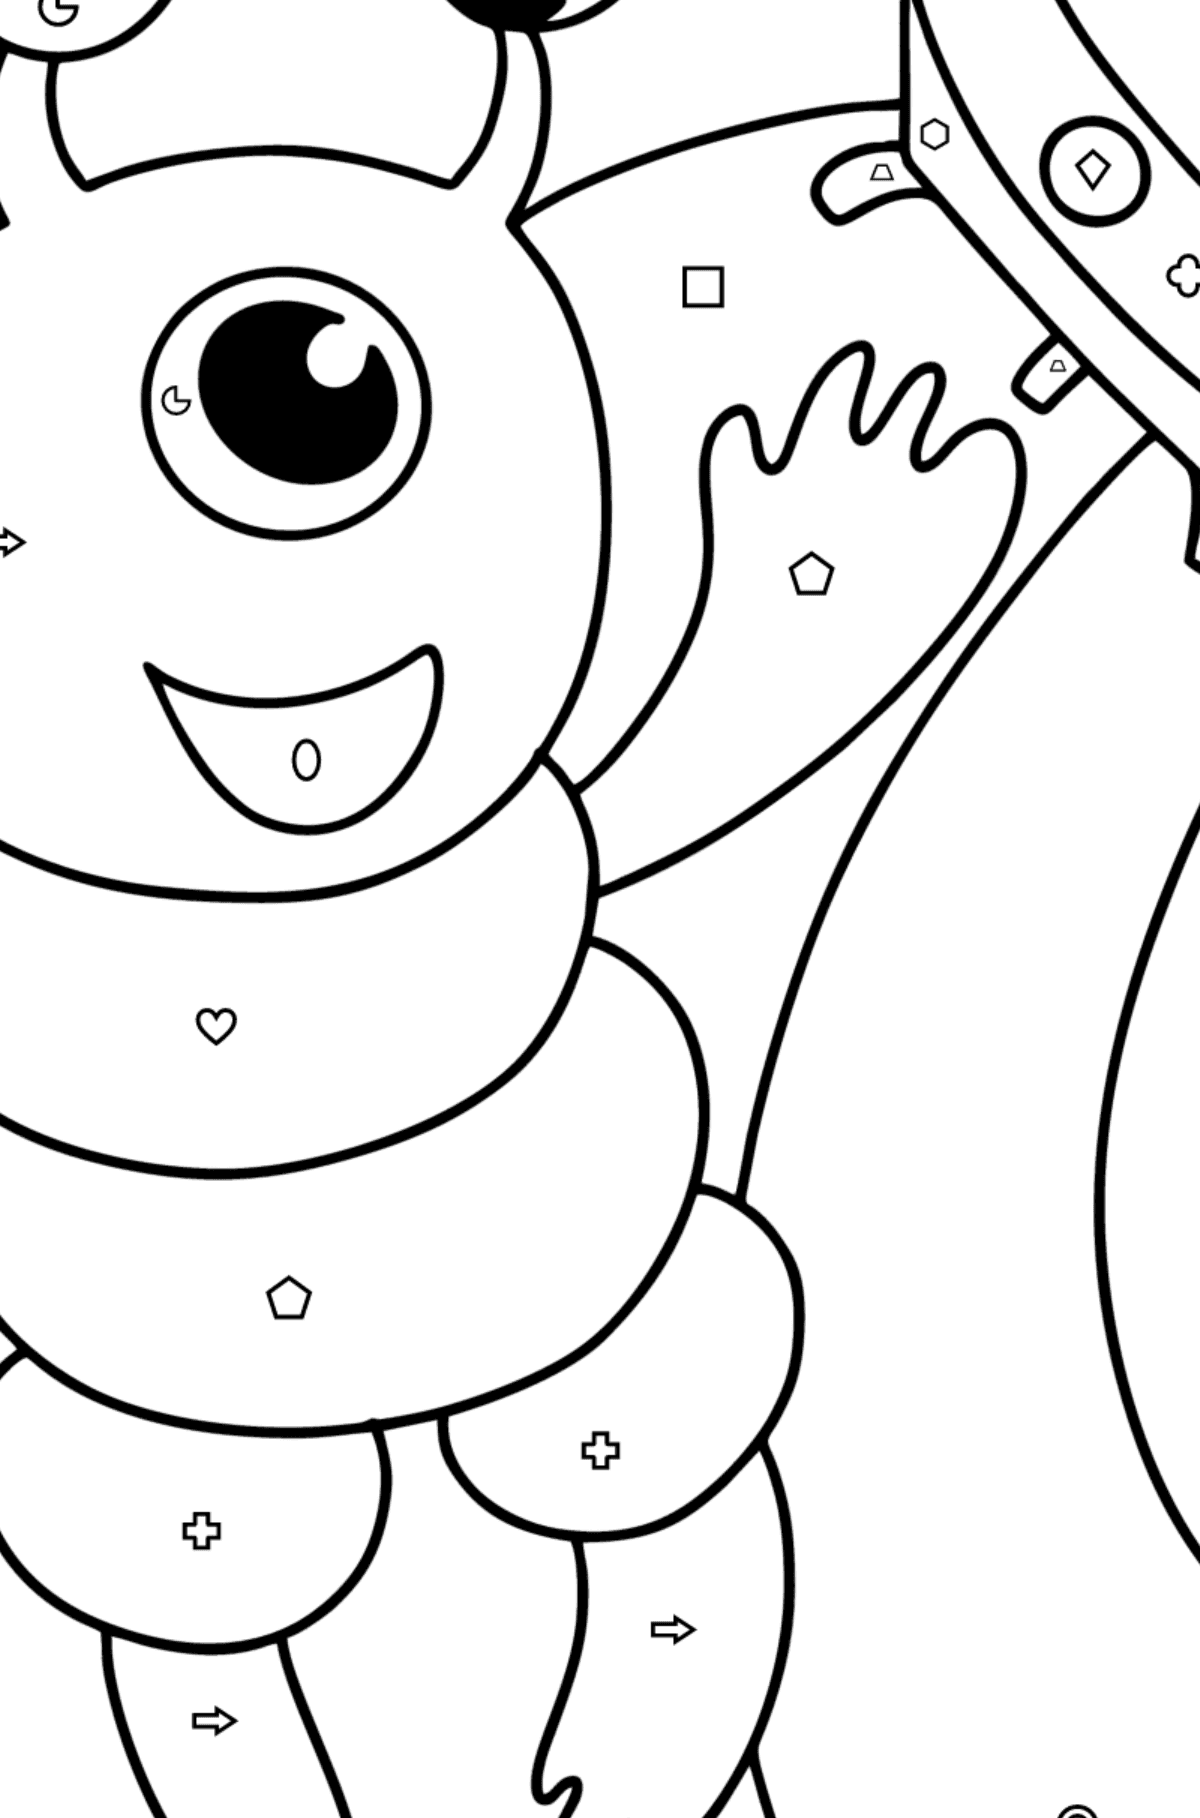 Alien in space coloring page - Coloring by Geometric Shapes for Kids